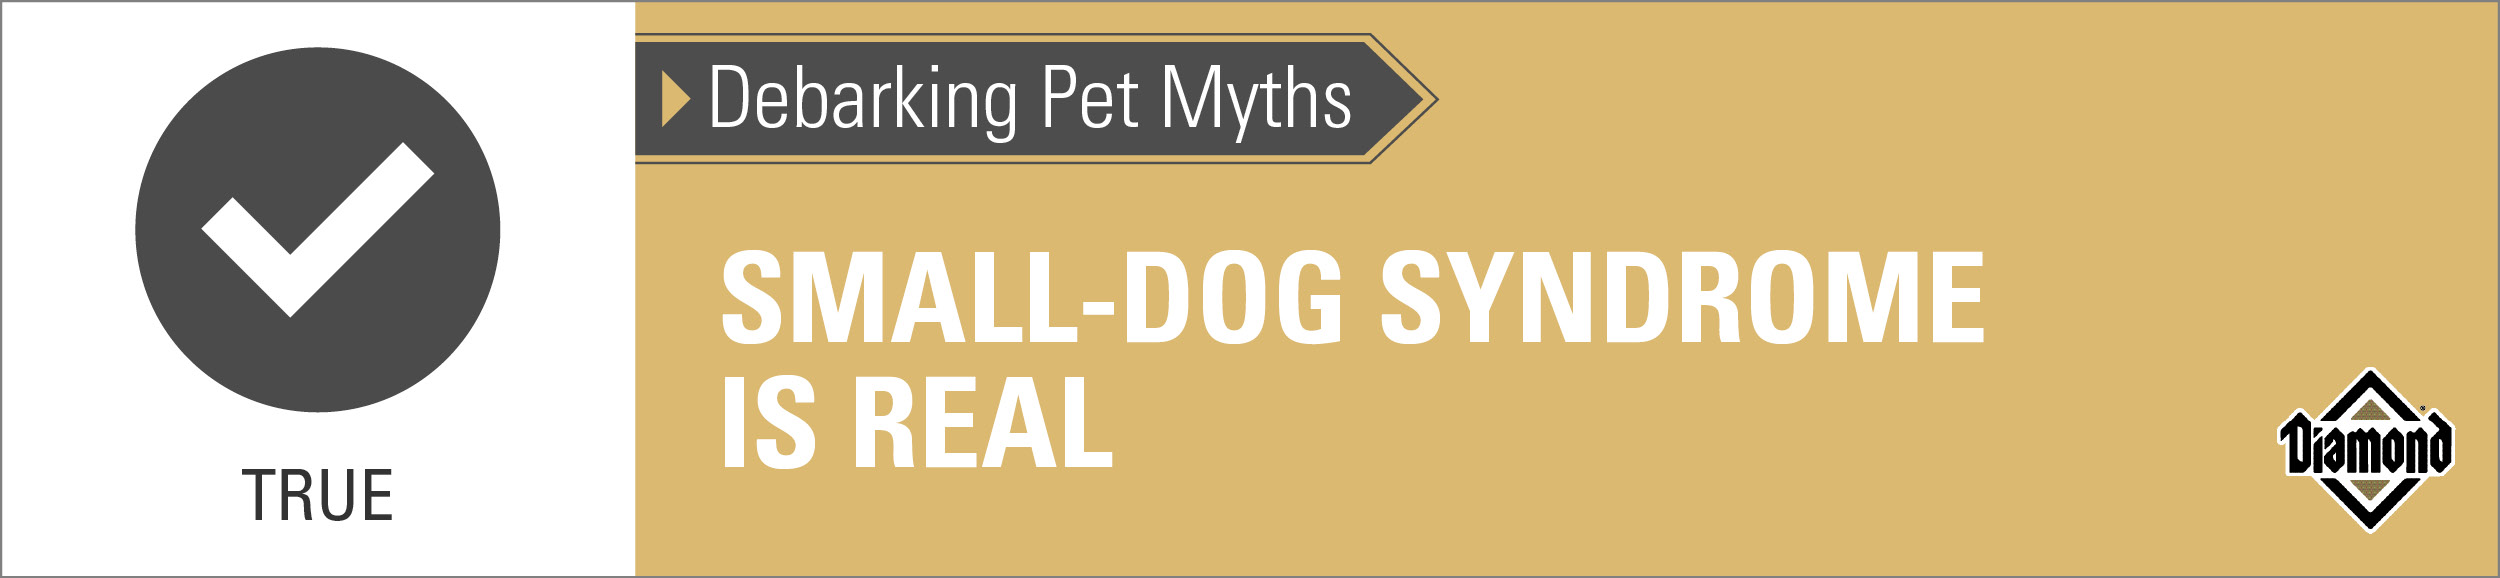 True: Small-Dog Syndrome is Real Graphic | Diamond Pet Foods